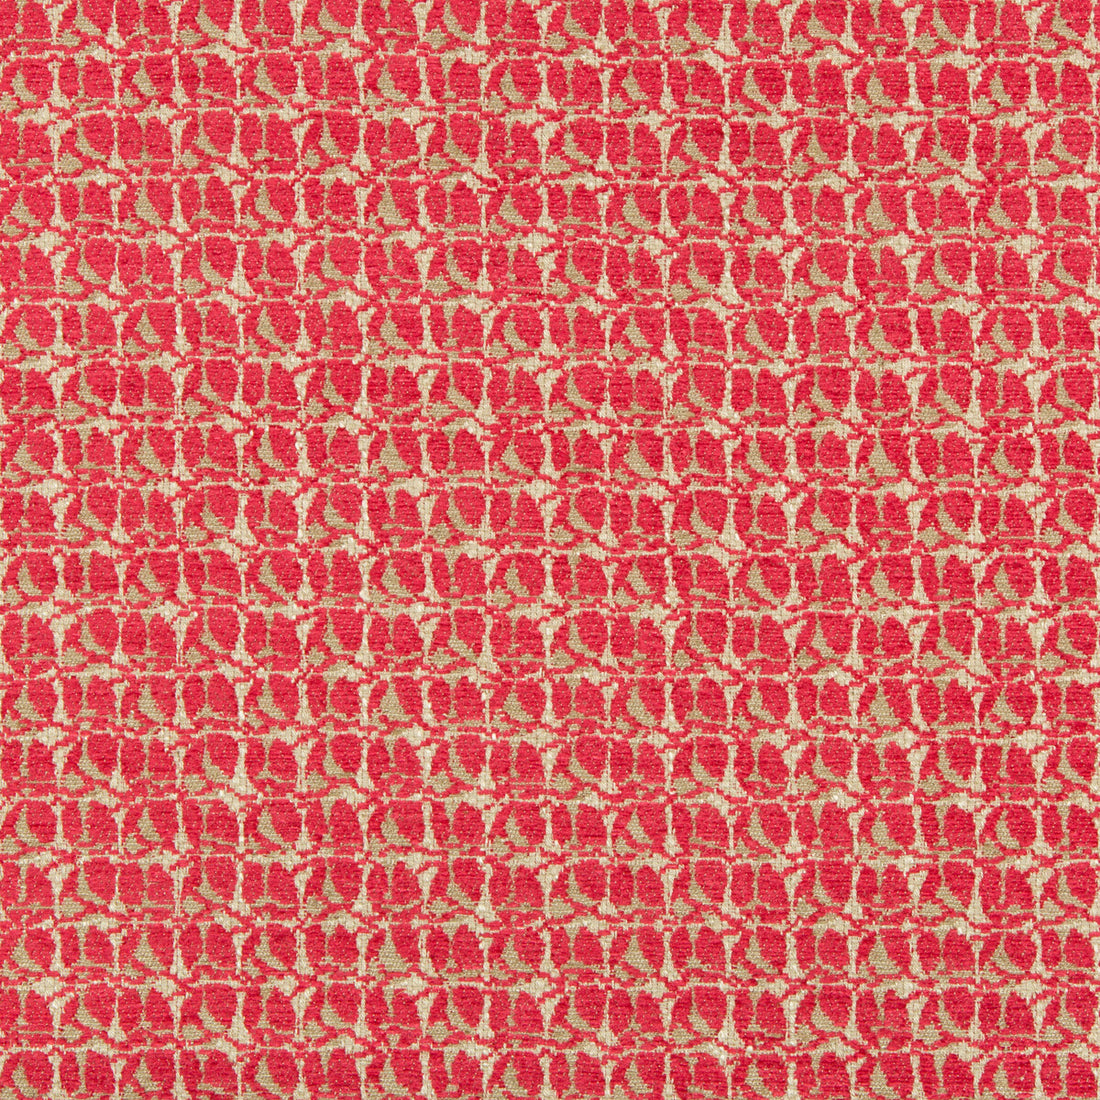 Jasper Weave fabric in cerise color - pattern GWF-3749.19.0 - by Lee Jofa Modern in the Gems collection